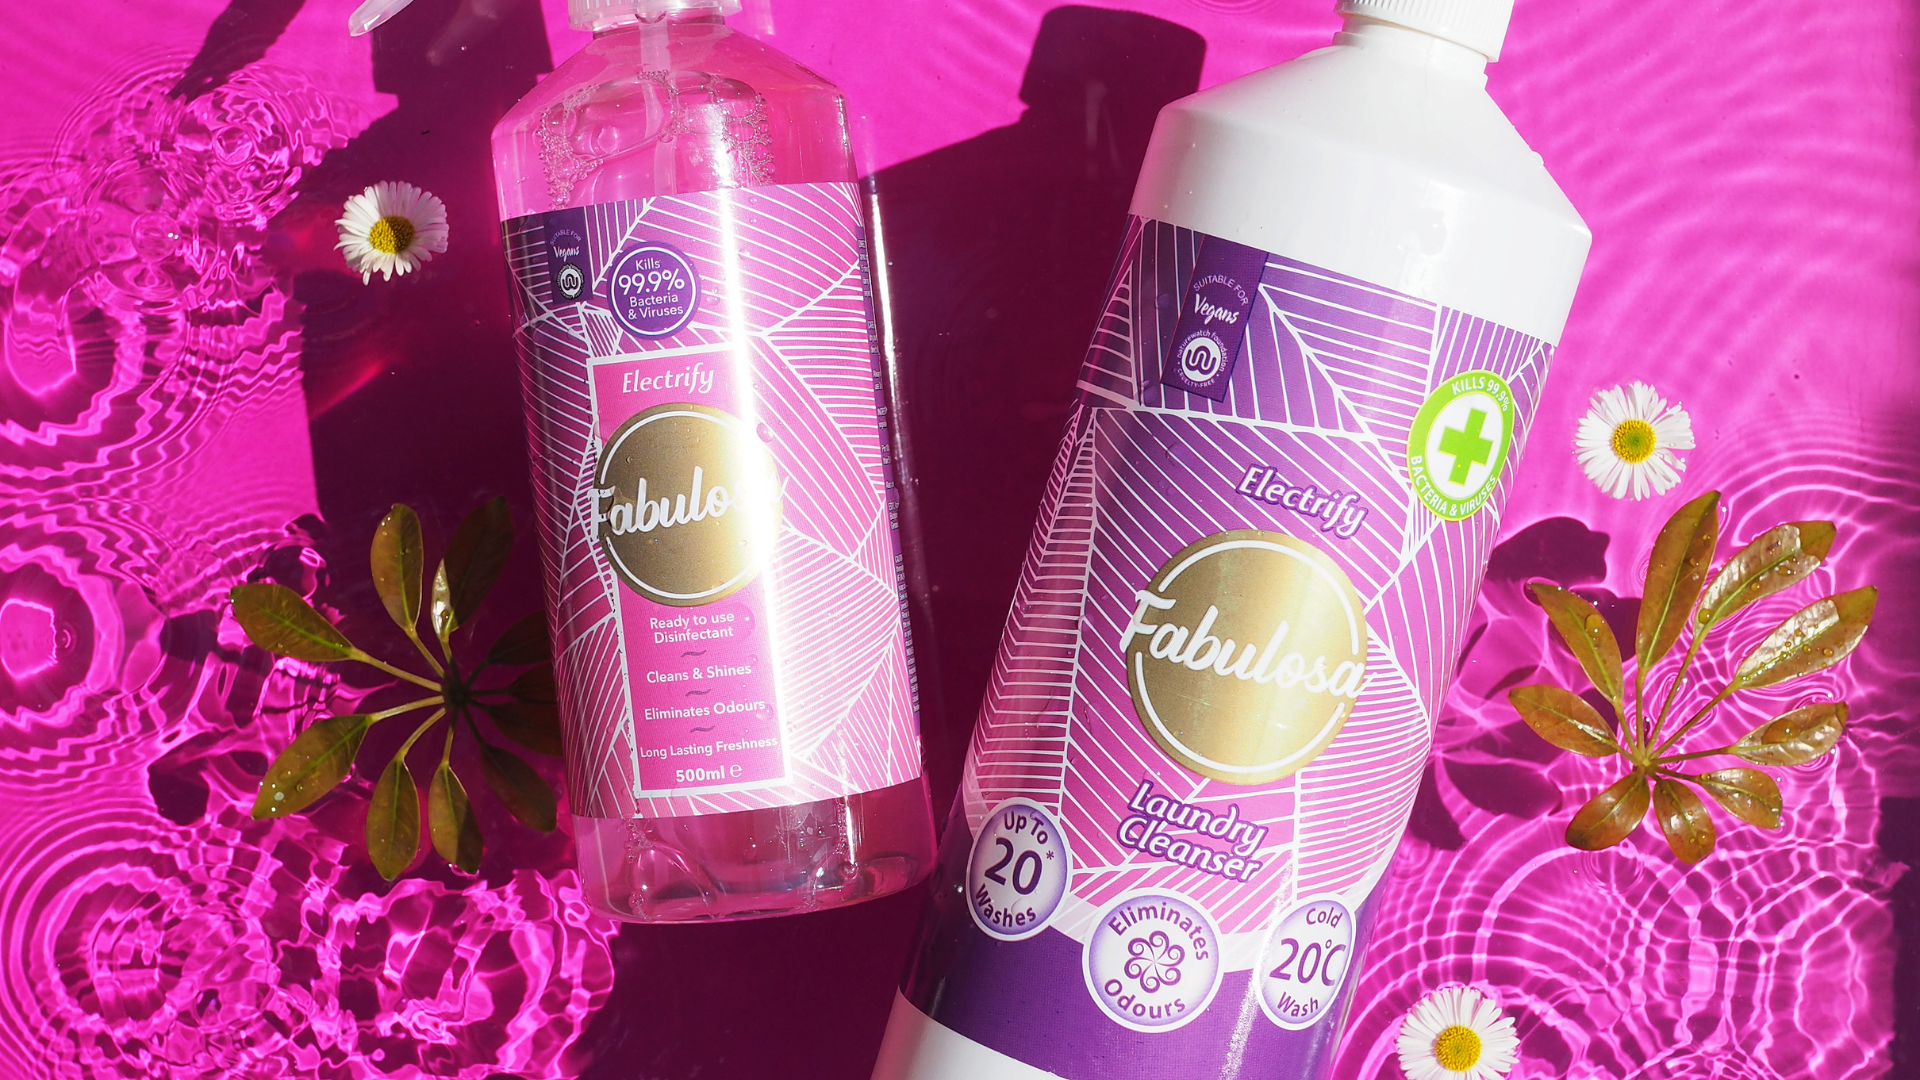 The Story Behind Fabulosa: How the Brand Became a Household Name